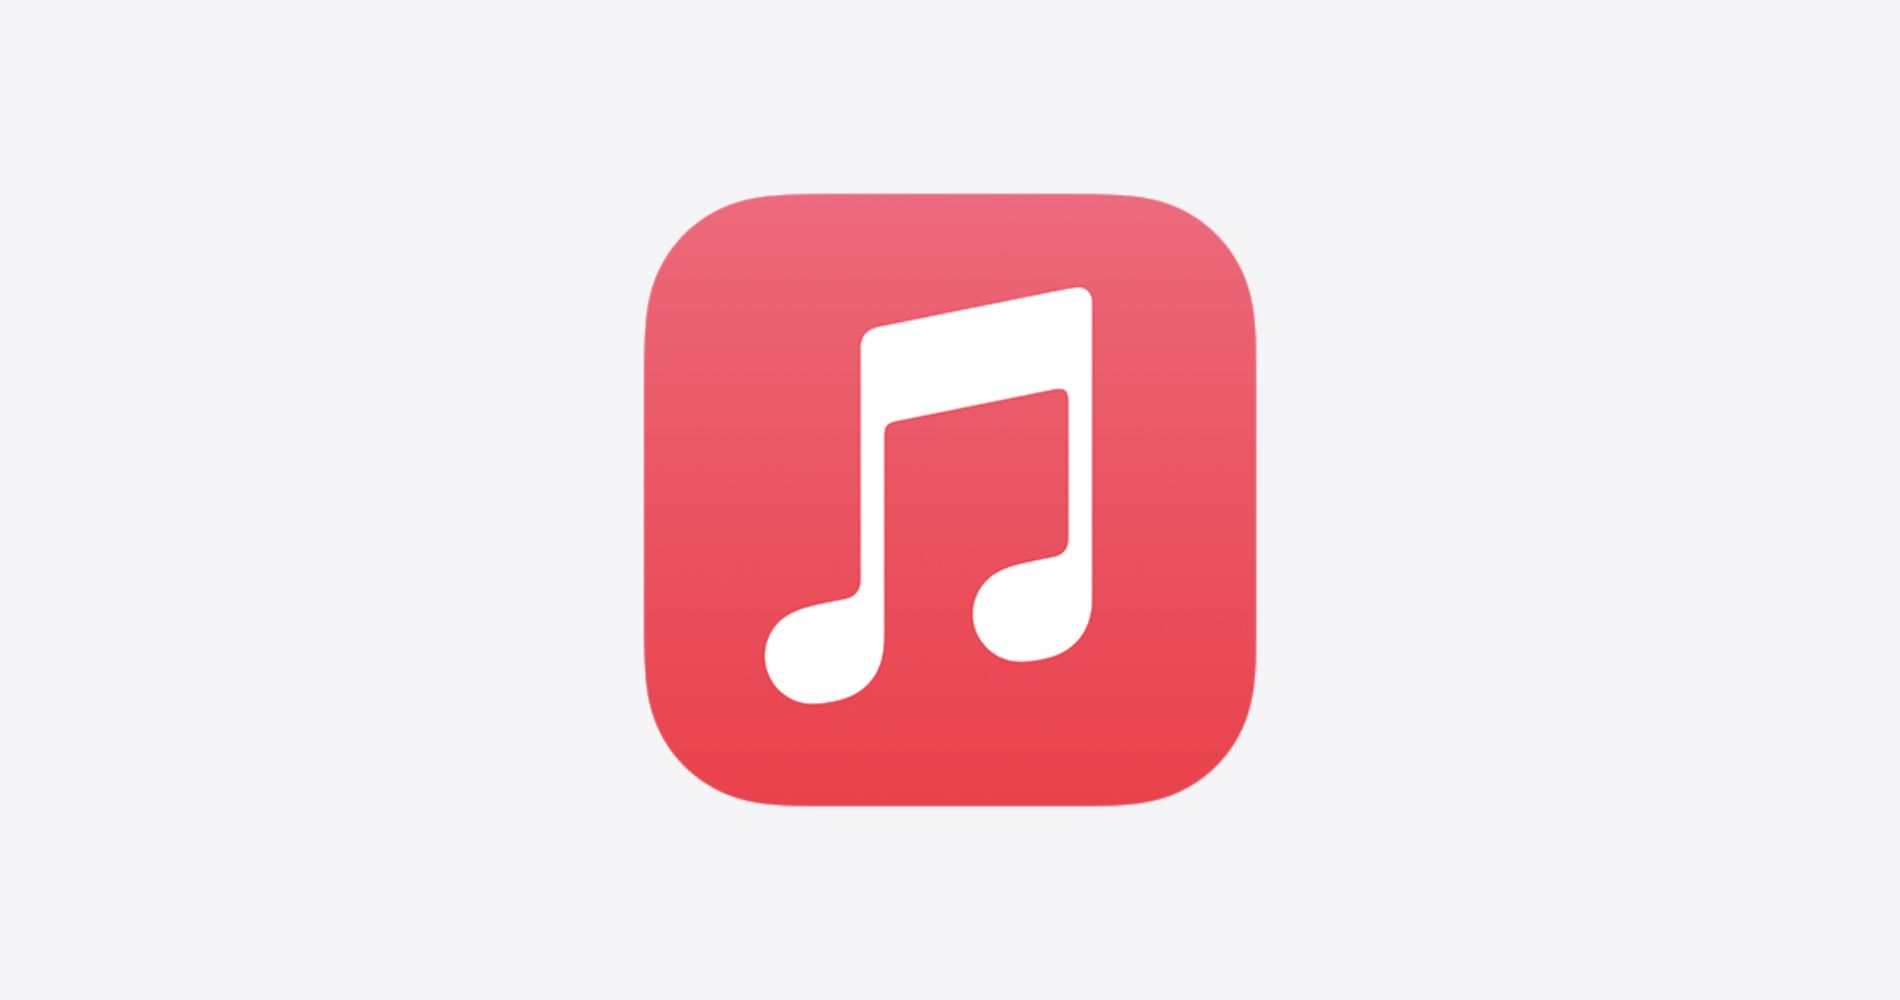 Apple is preparing to launch a standalone classical music app